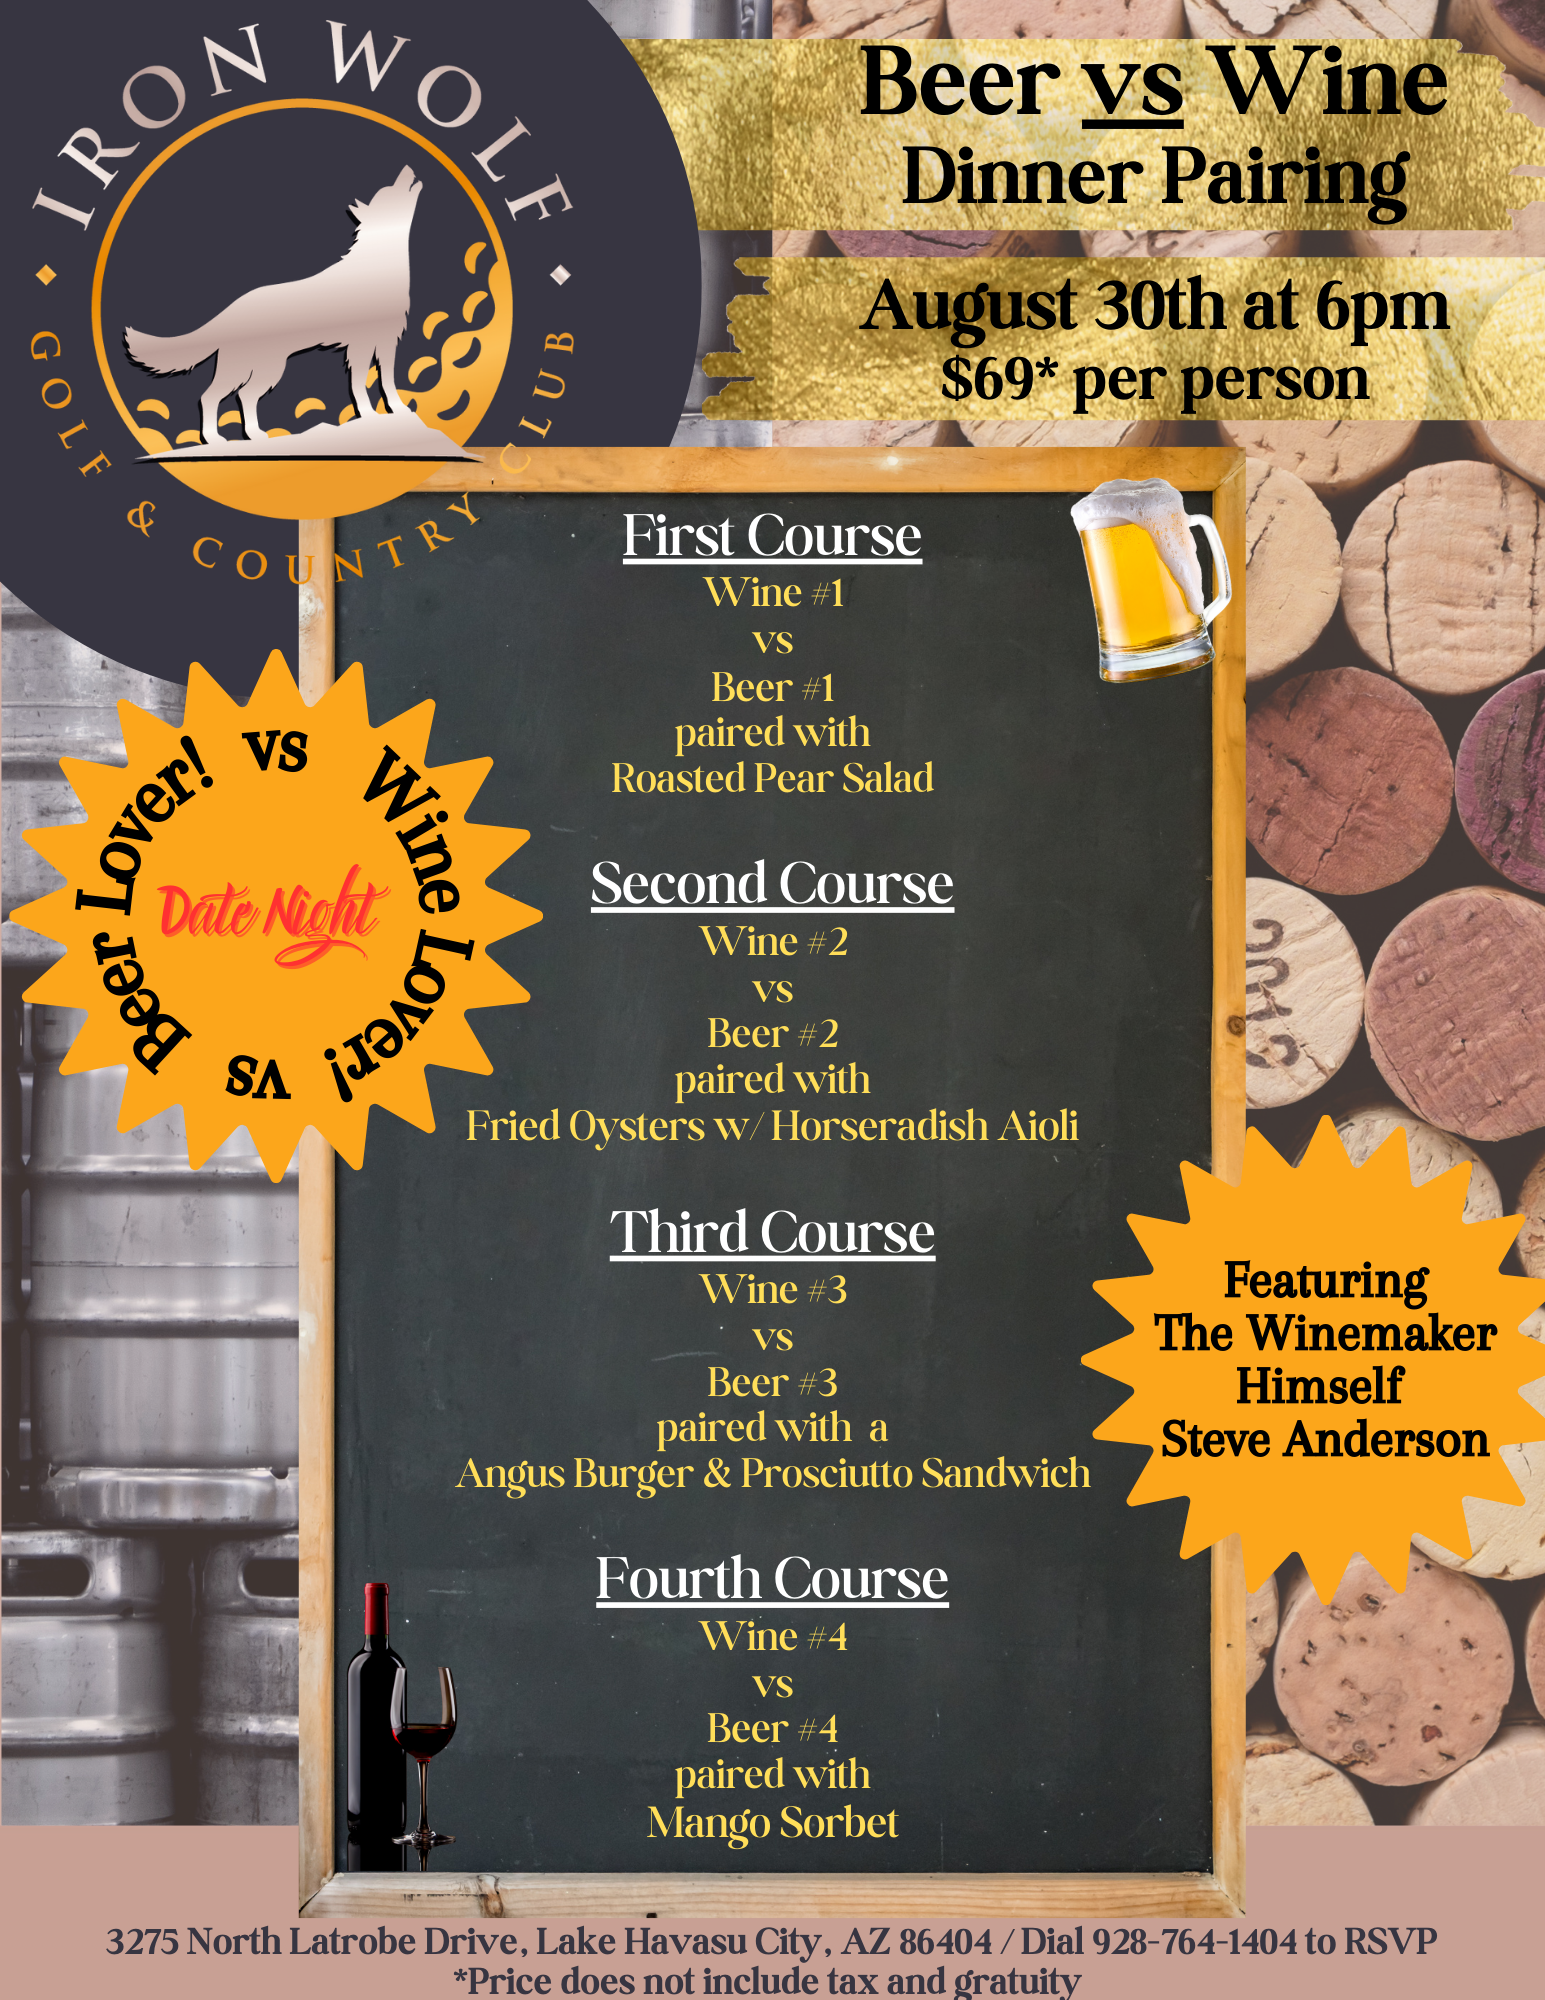 Beer vs. Wine Dinner at the Iron Wolf Golf and Country Club